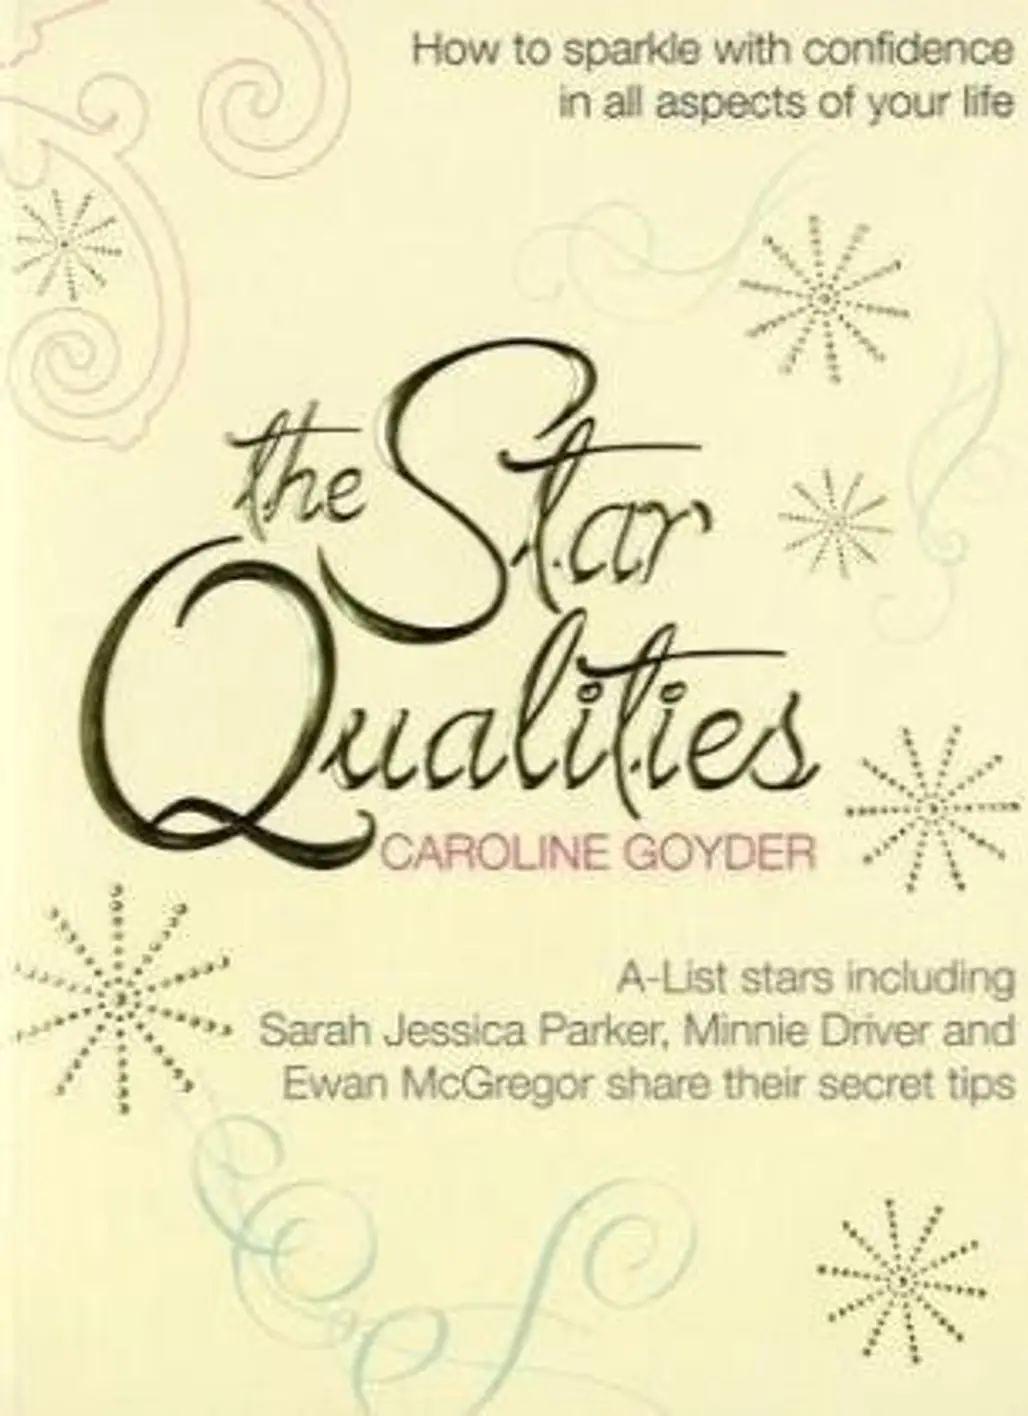 The Star Qualities: How to Sparkle with Confidence in All Aspects of Your Life